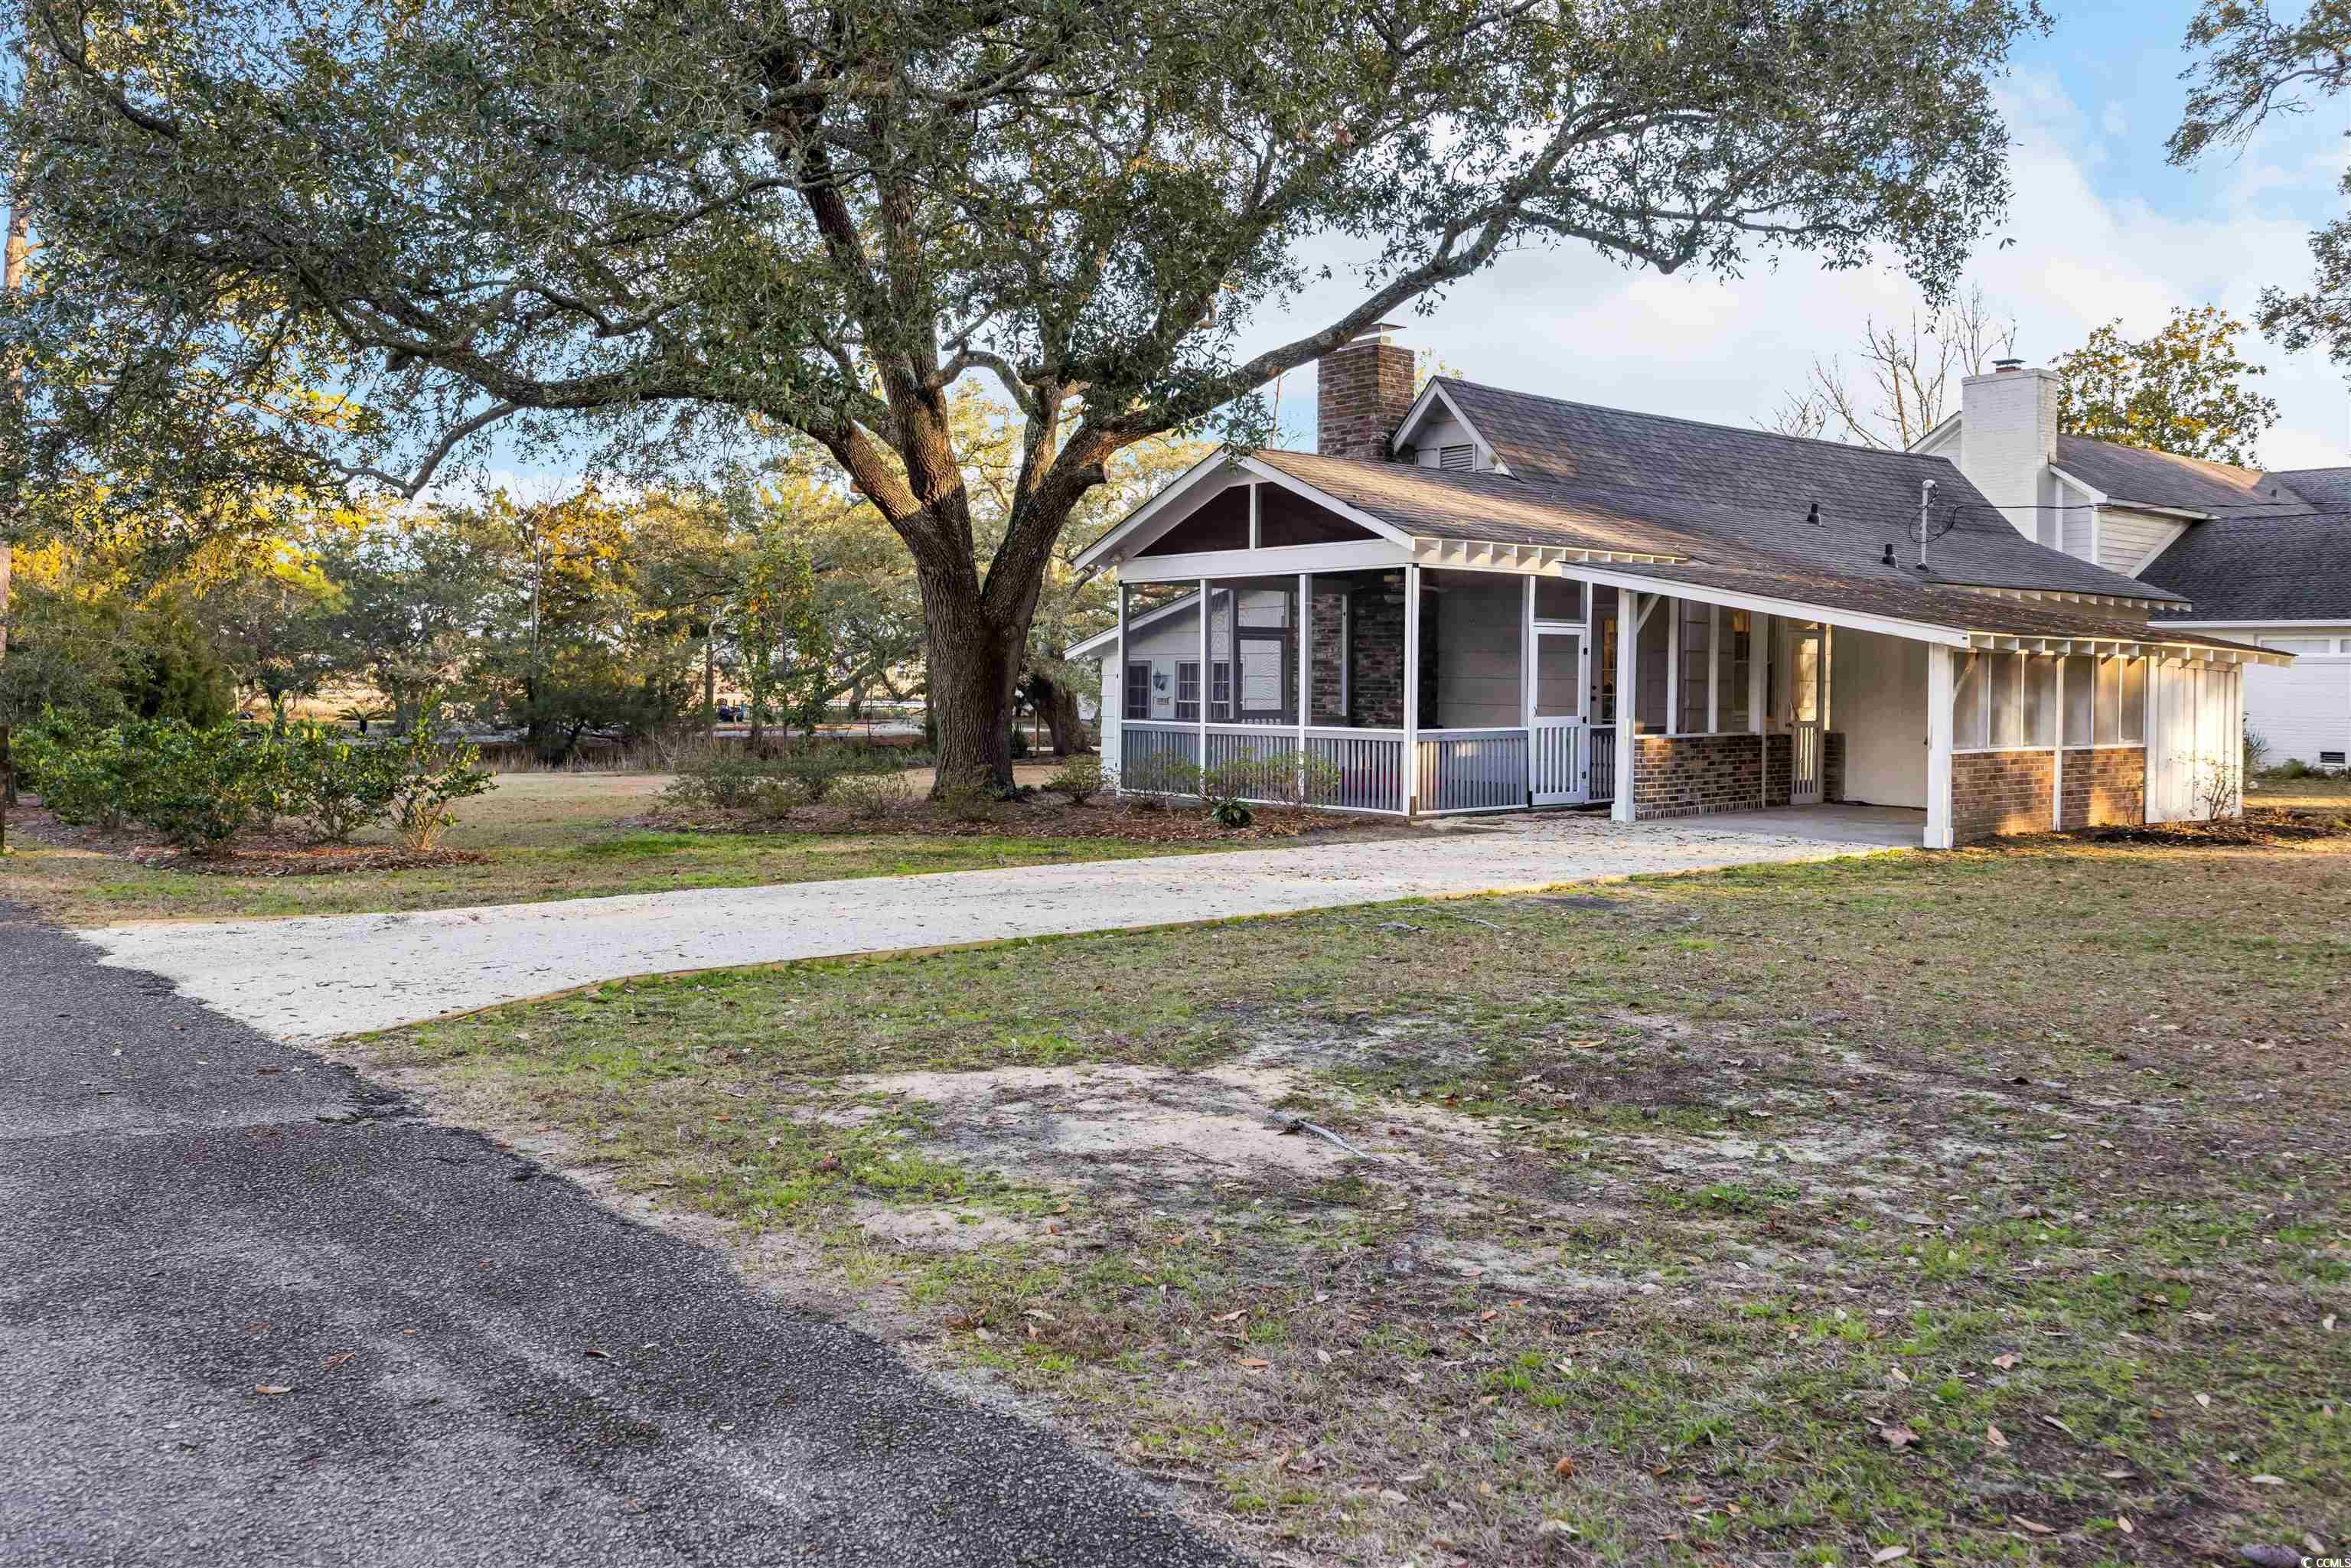 145 Midway Dr. Pawleys Island, SC 29585